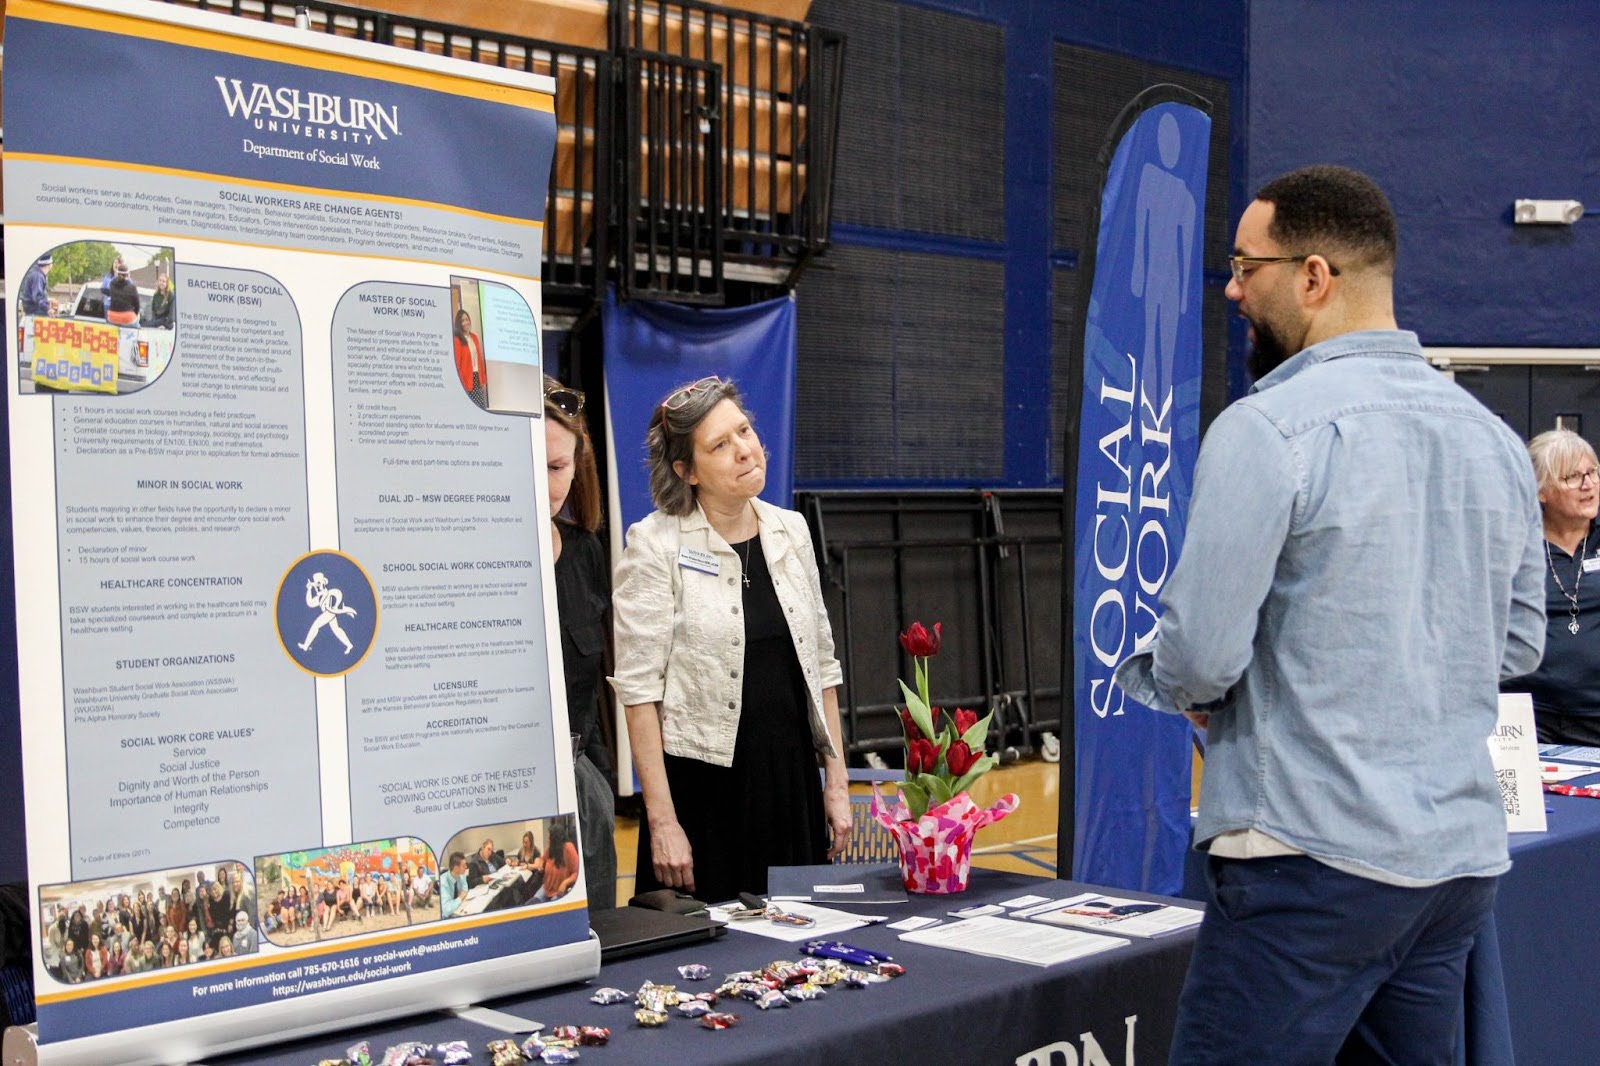 Washburn University also provides academic choices for those who want to upgrade their academic degree or switch majors. There were also free headshots offered by the Washburn Alumni Association for students to update their professional resume profiles.